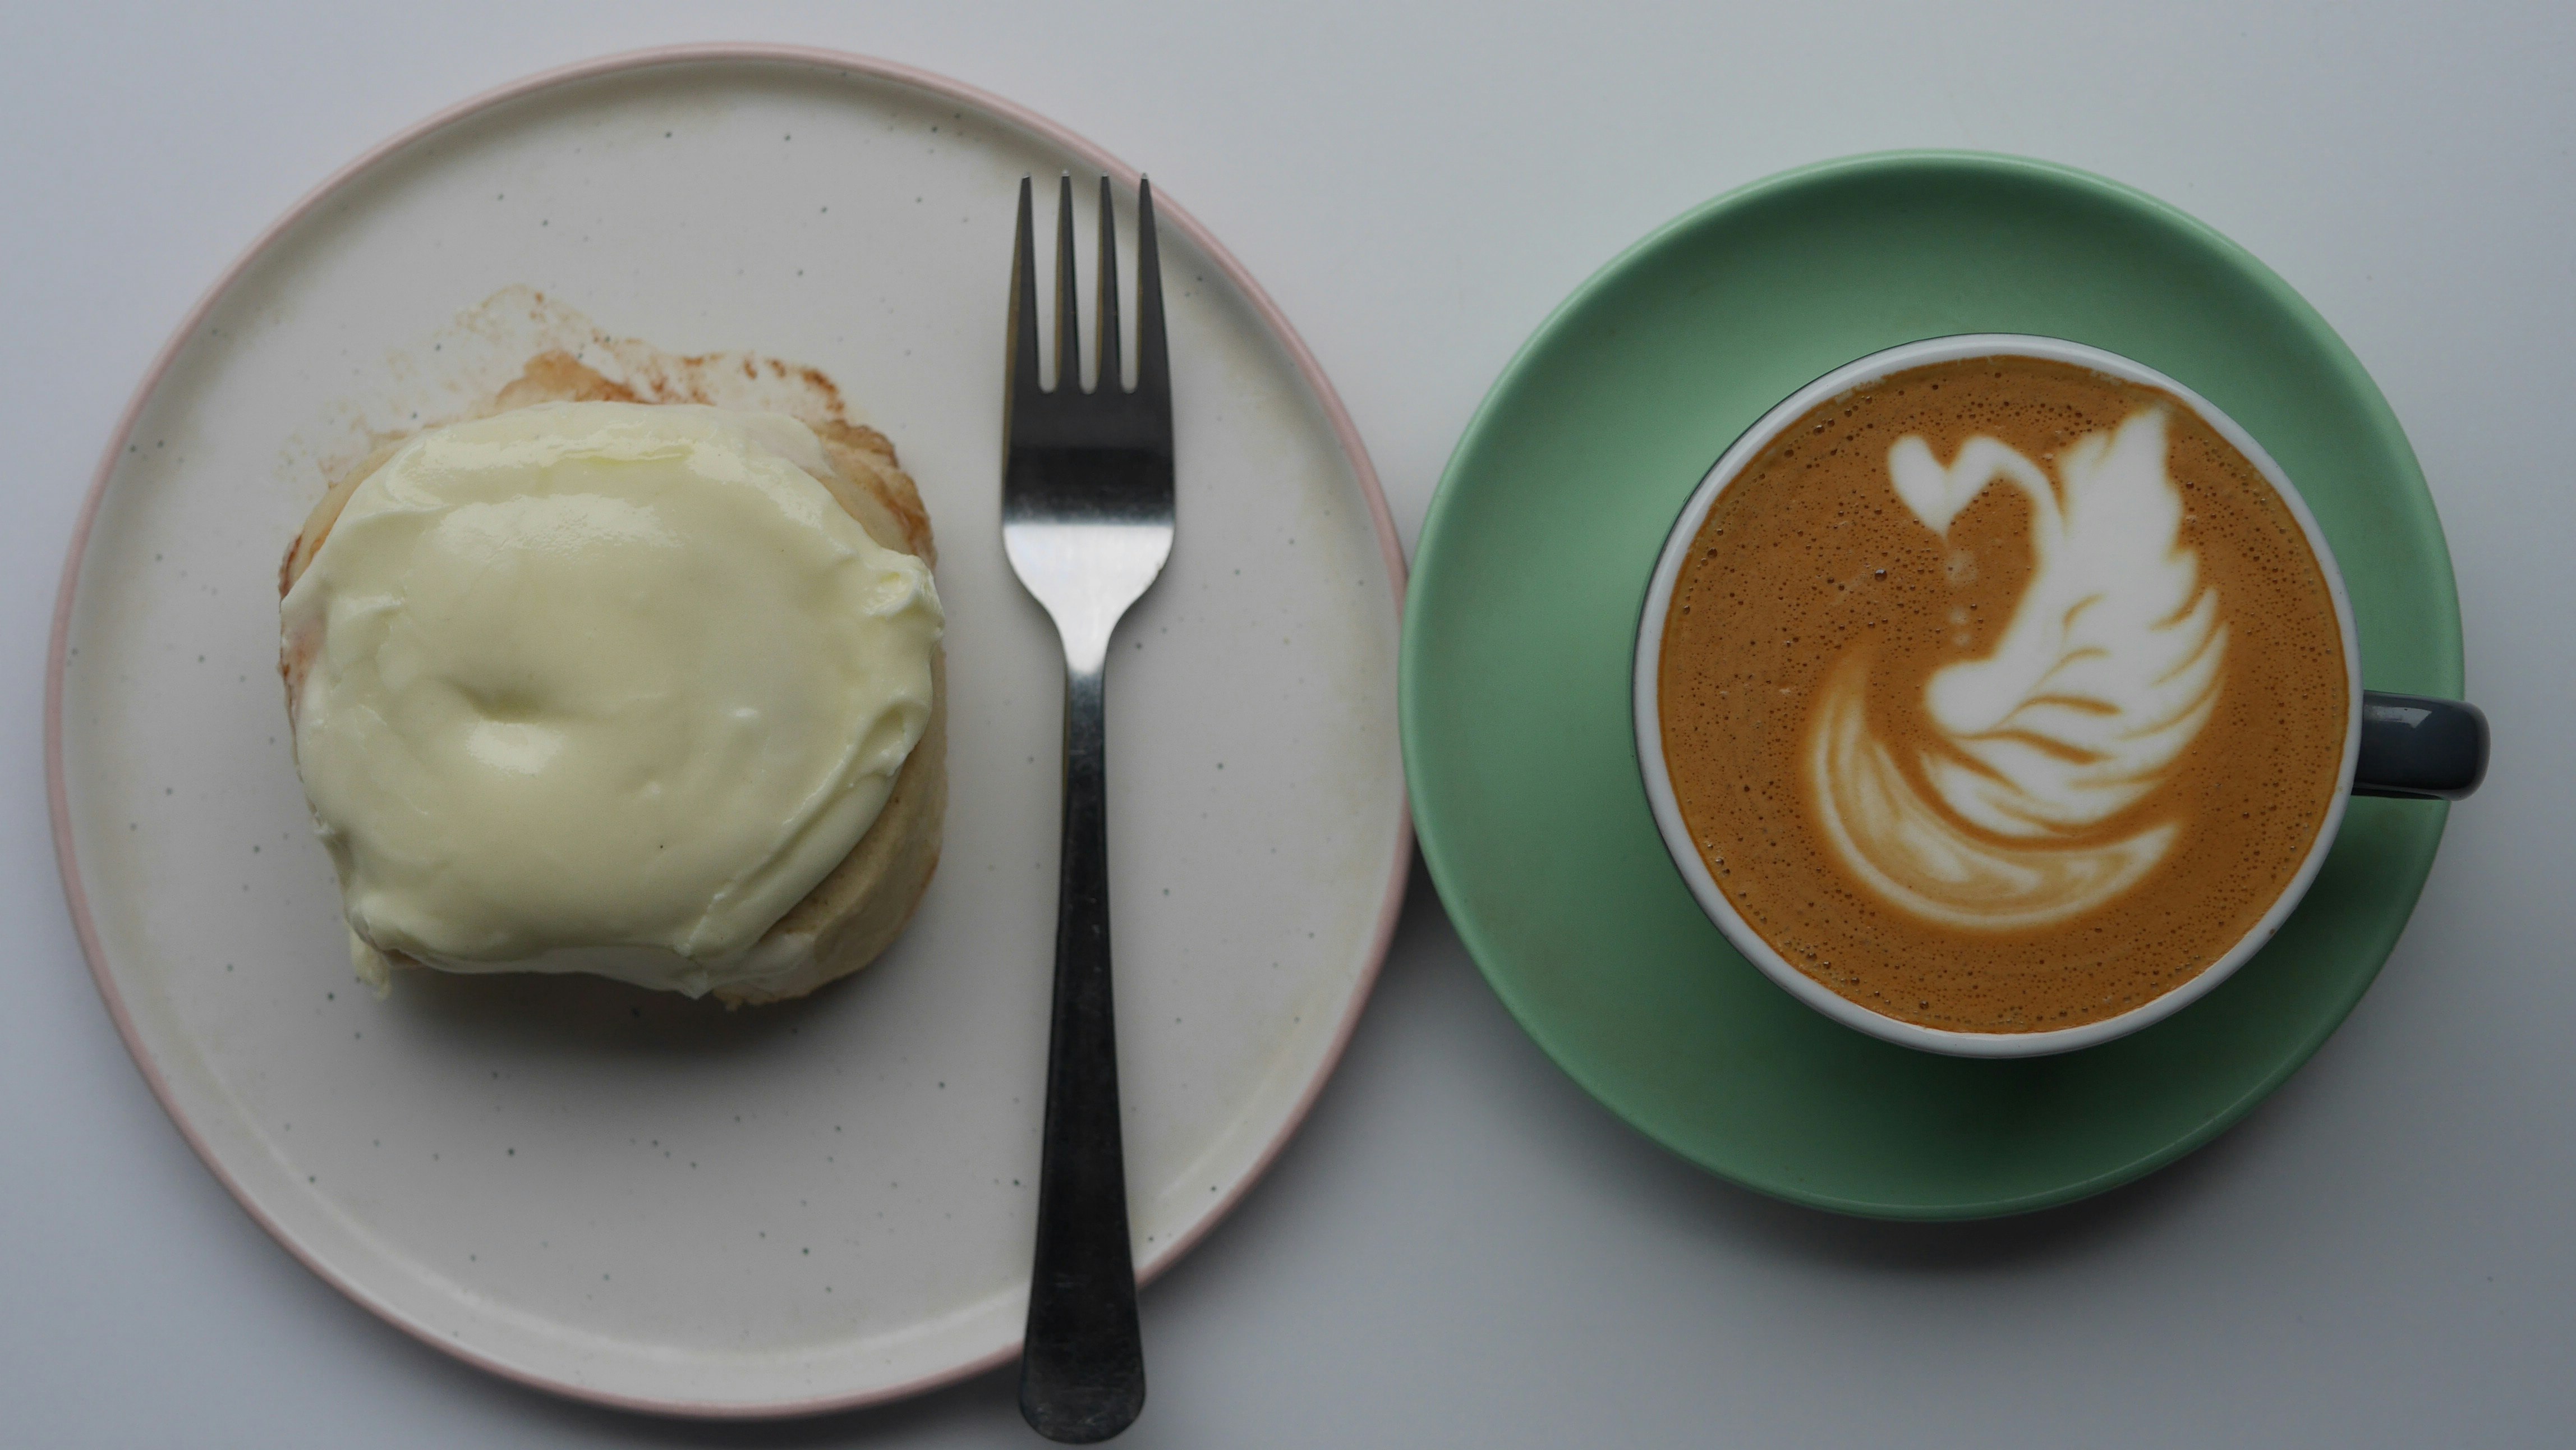 A cake with white icing on a white plate with a fork sits next to a green saucer with a cup of coffee with latte art of a leaf.